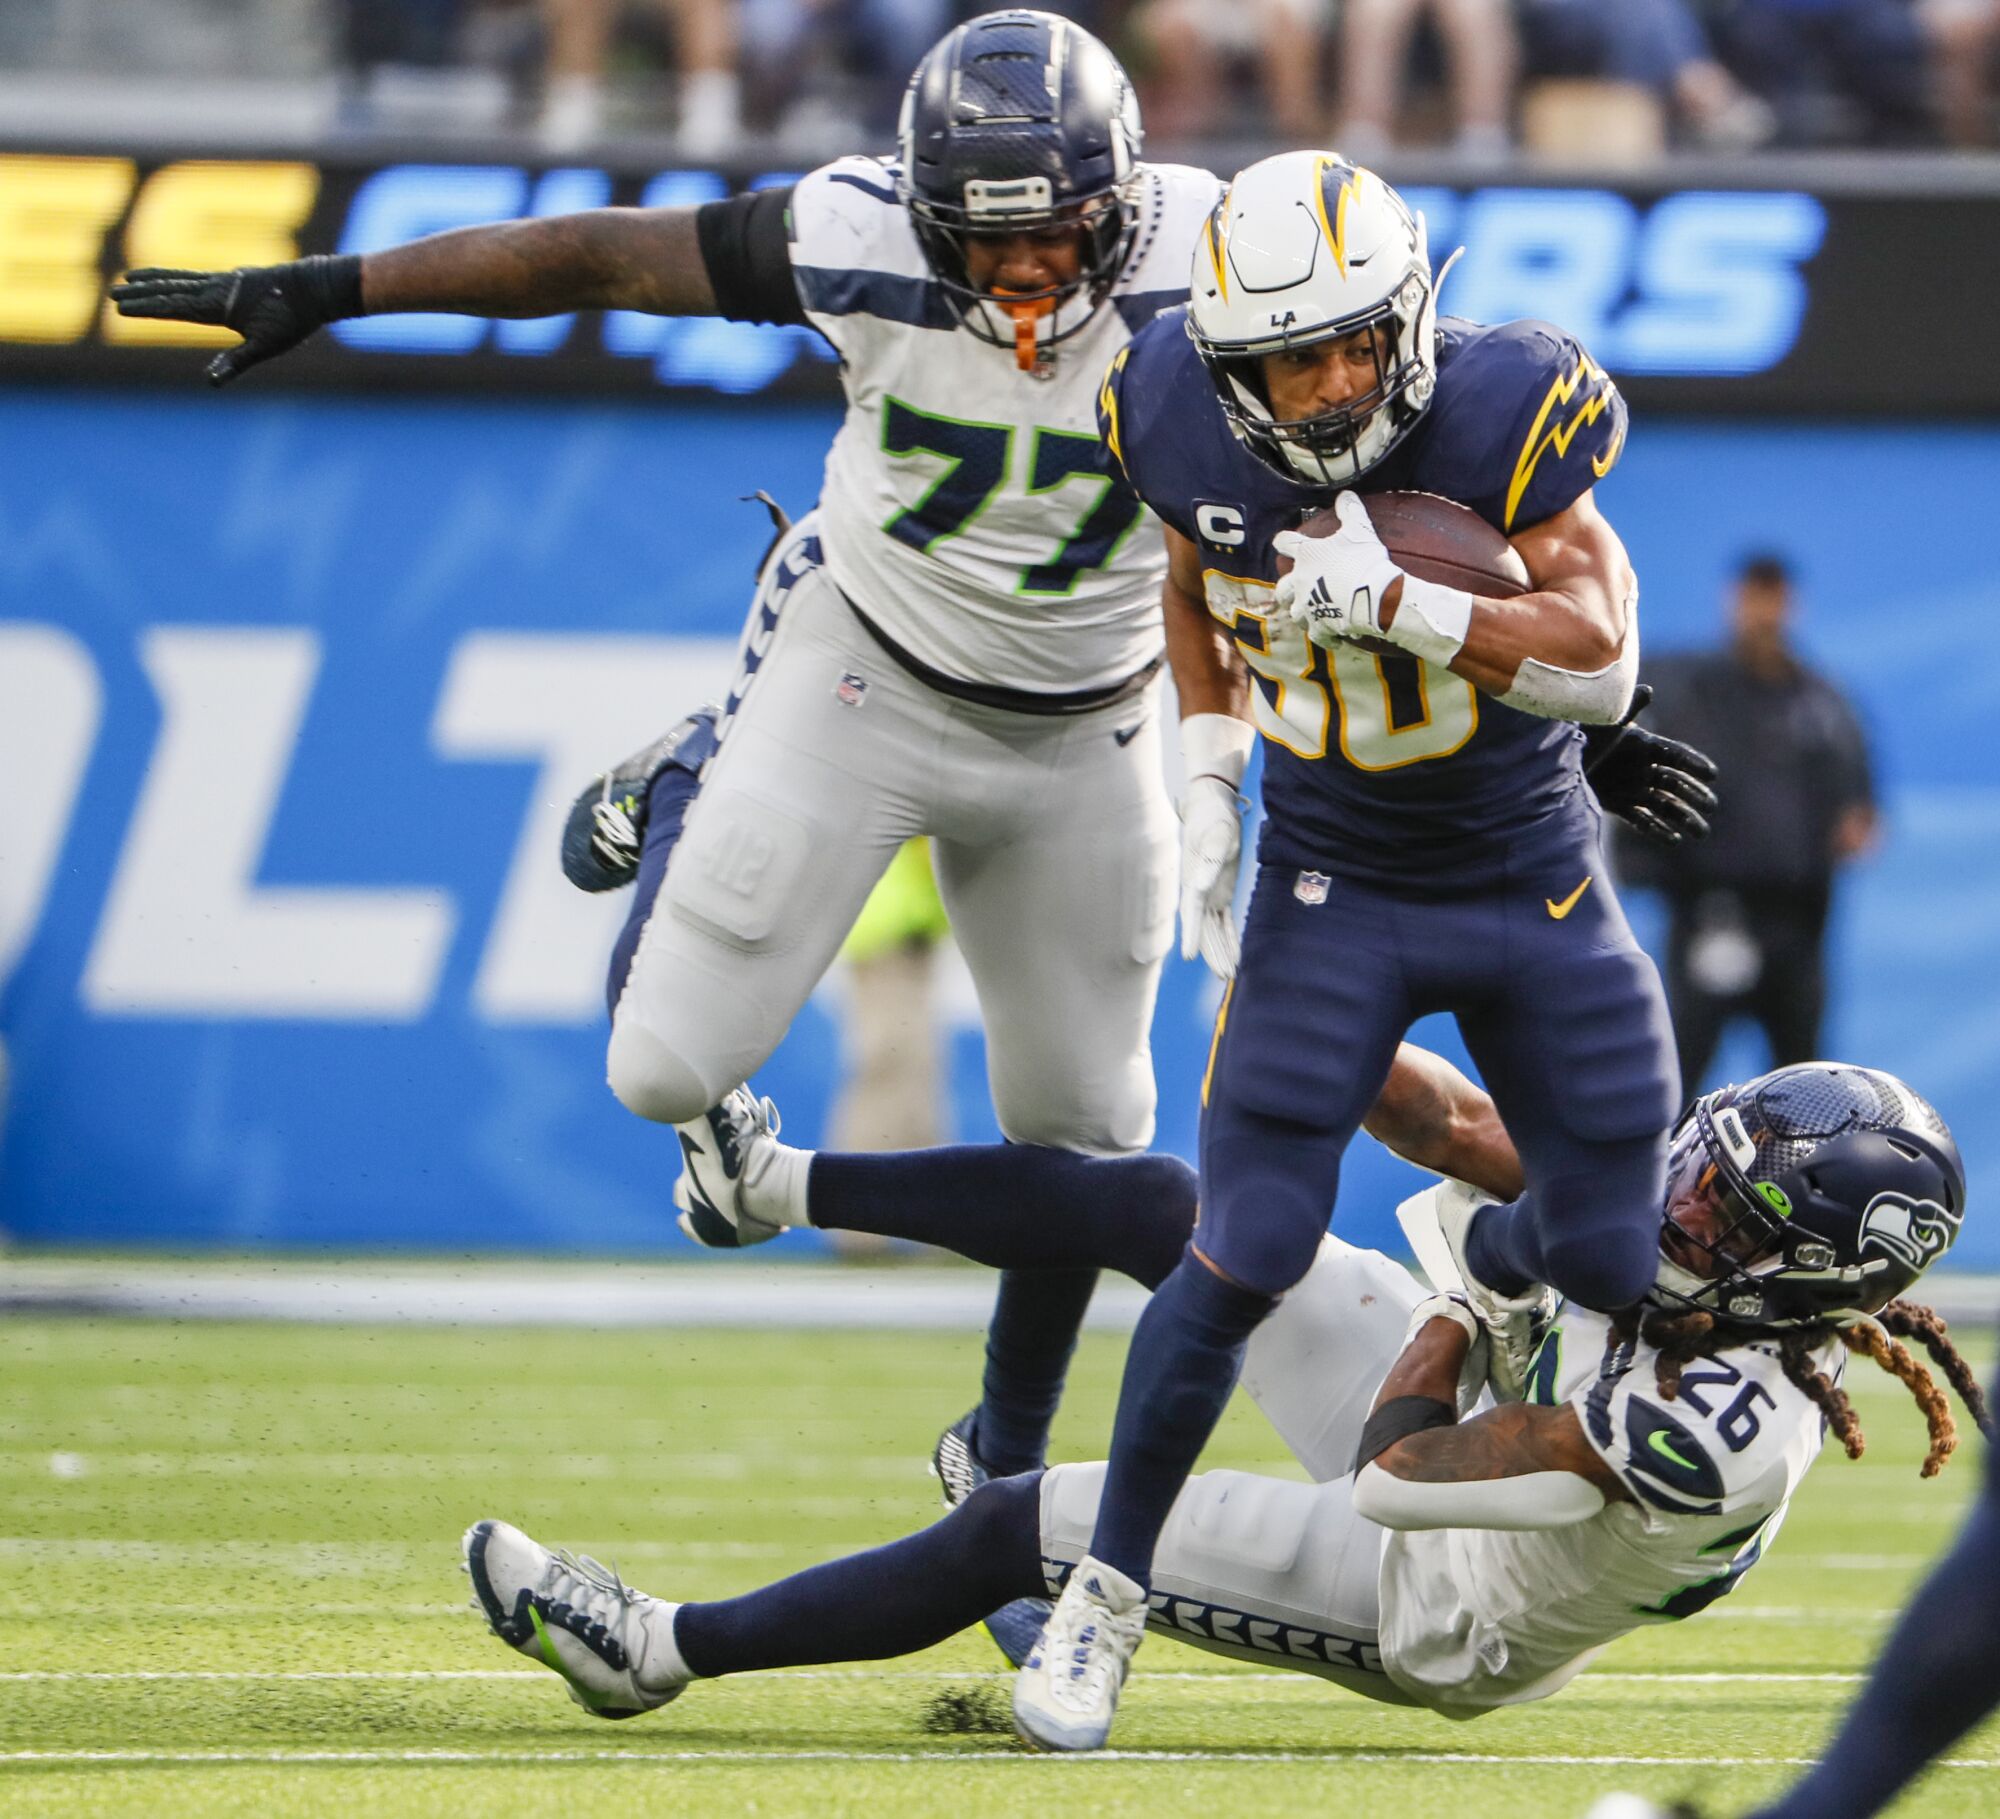 Chargers running back Austin Ekeler is pursued by Seahawks defensive tackle Quinton Jefferson and safety Ryan Neal.